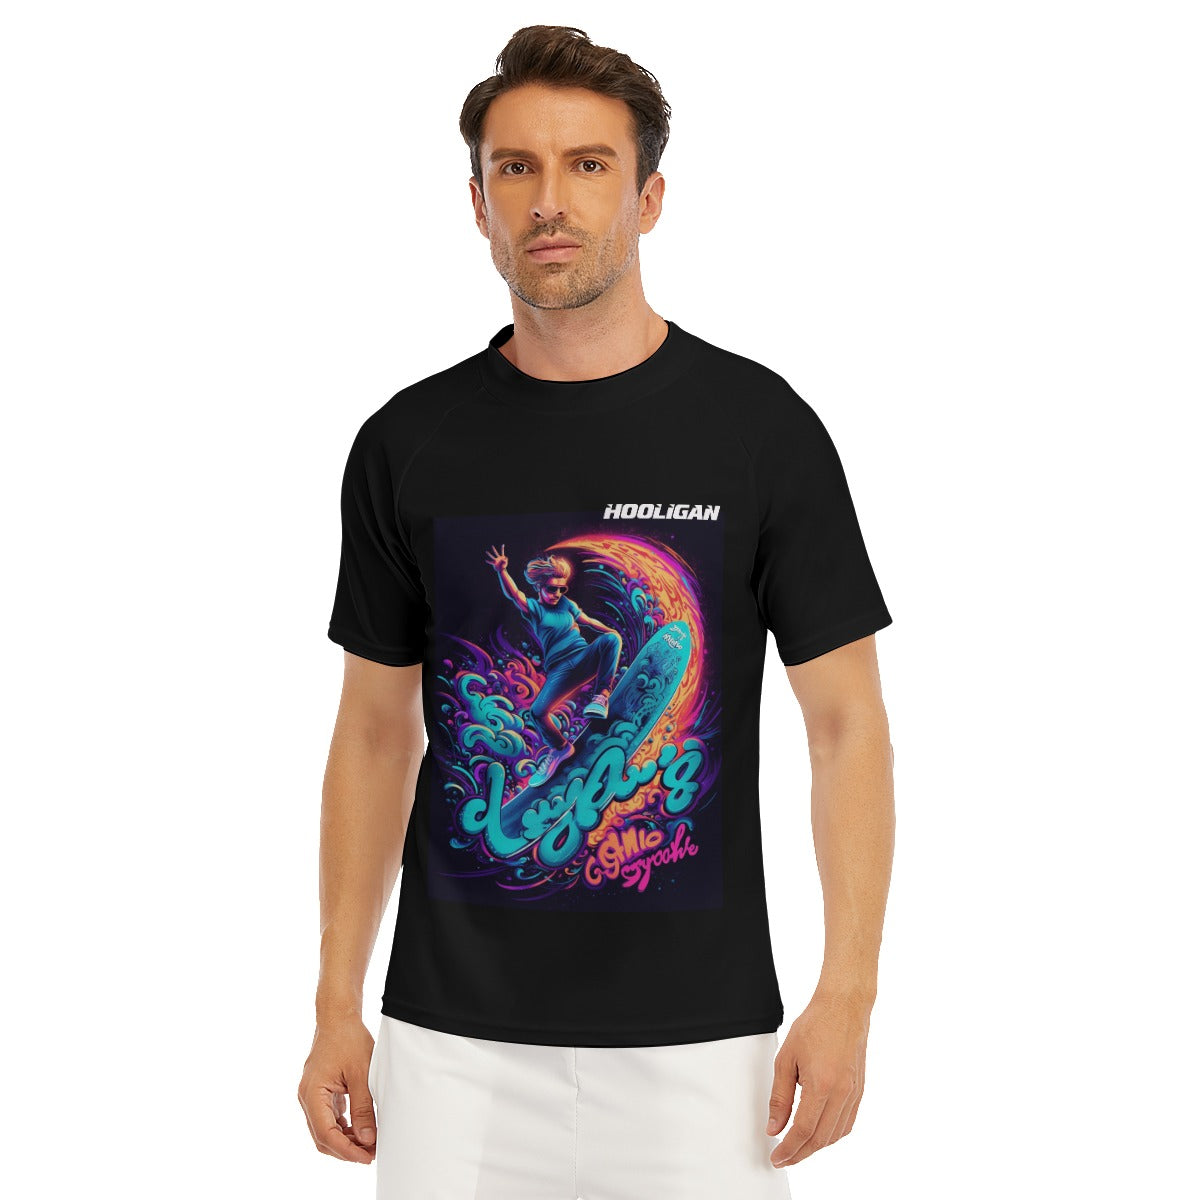 All-Over Print Men's Tight Surf Clothing With Half Sleeves